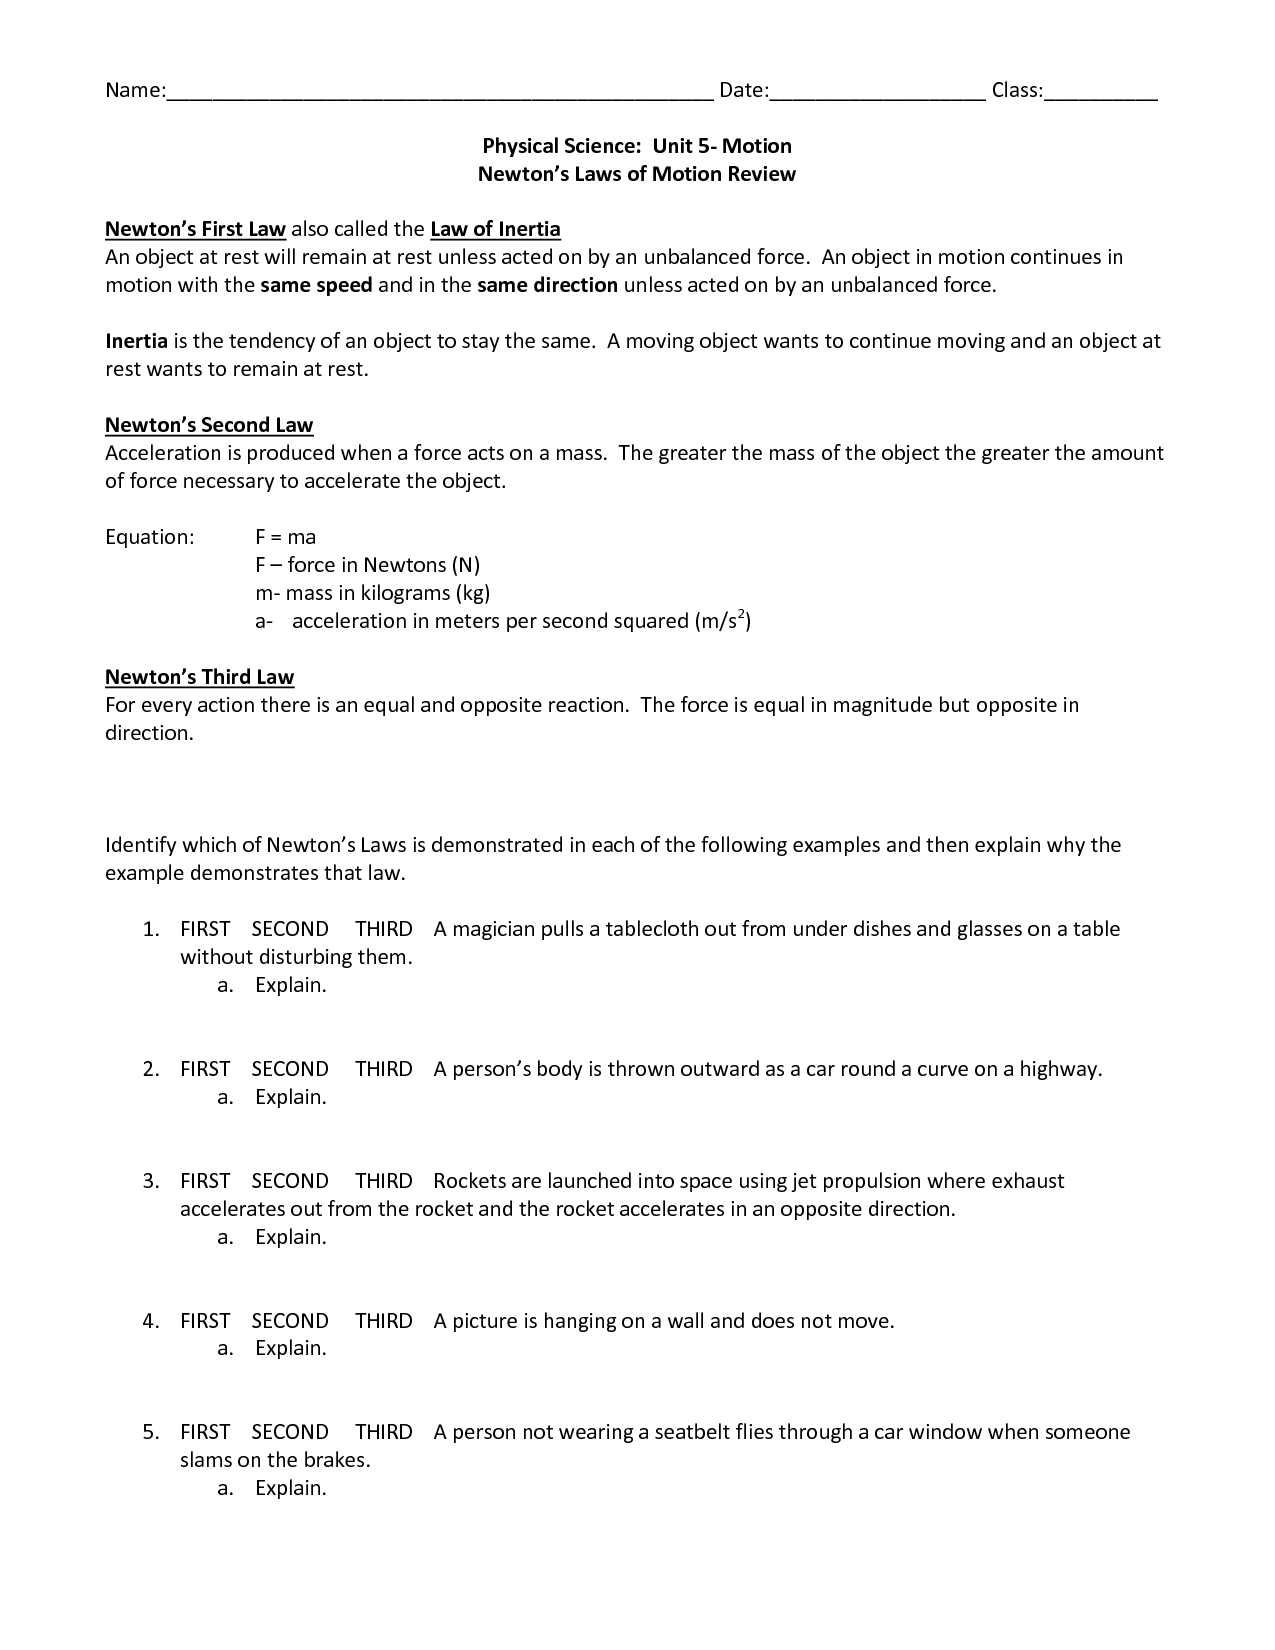 Newtons Laws Of Motion Worksheet Answers - Nidecmege Throughout Newton039s Third Law Worksheet Answers